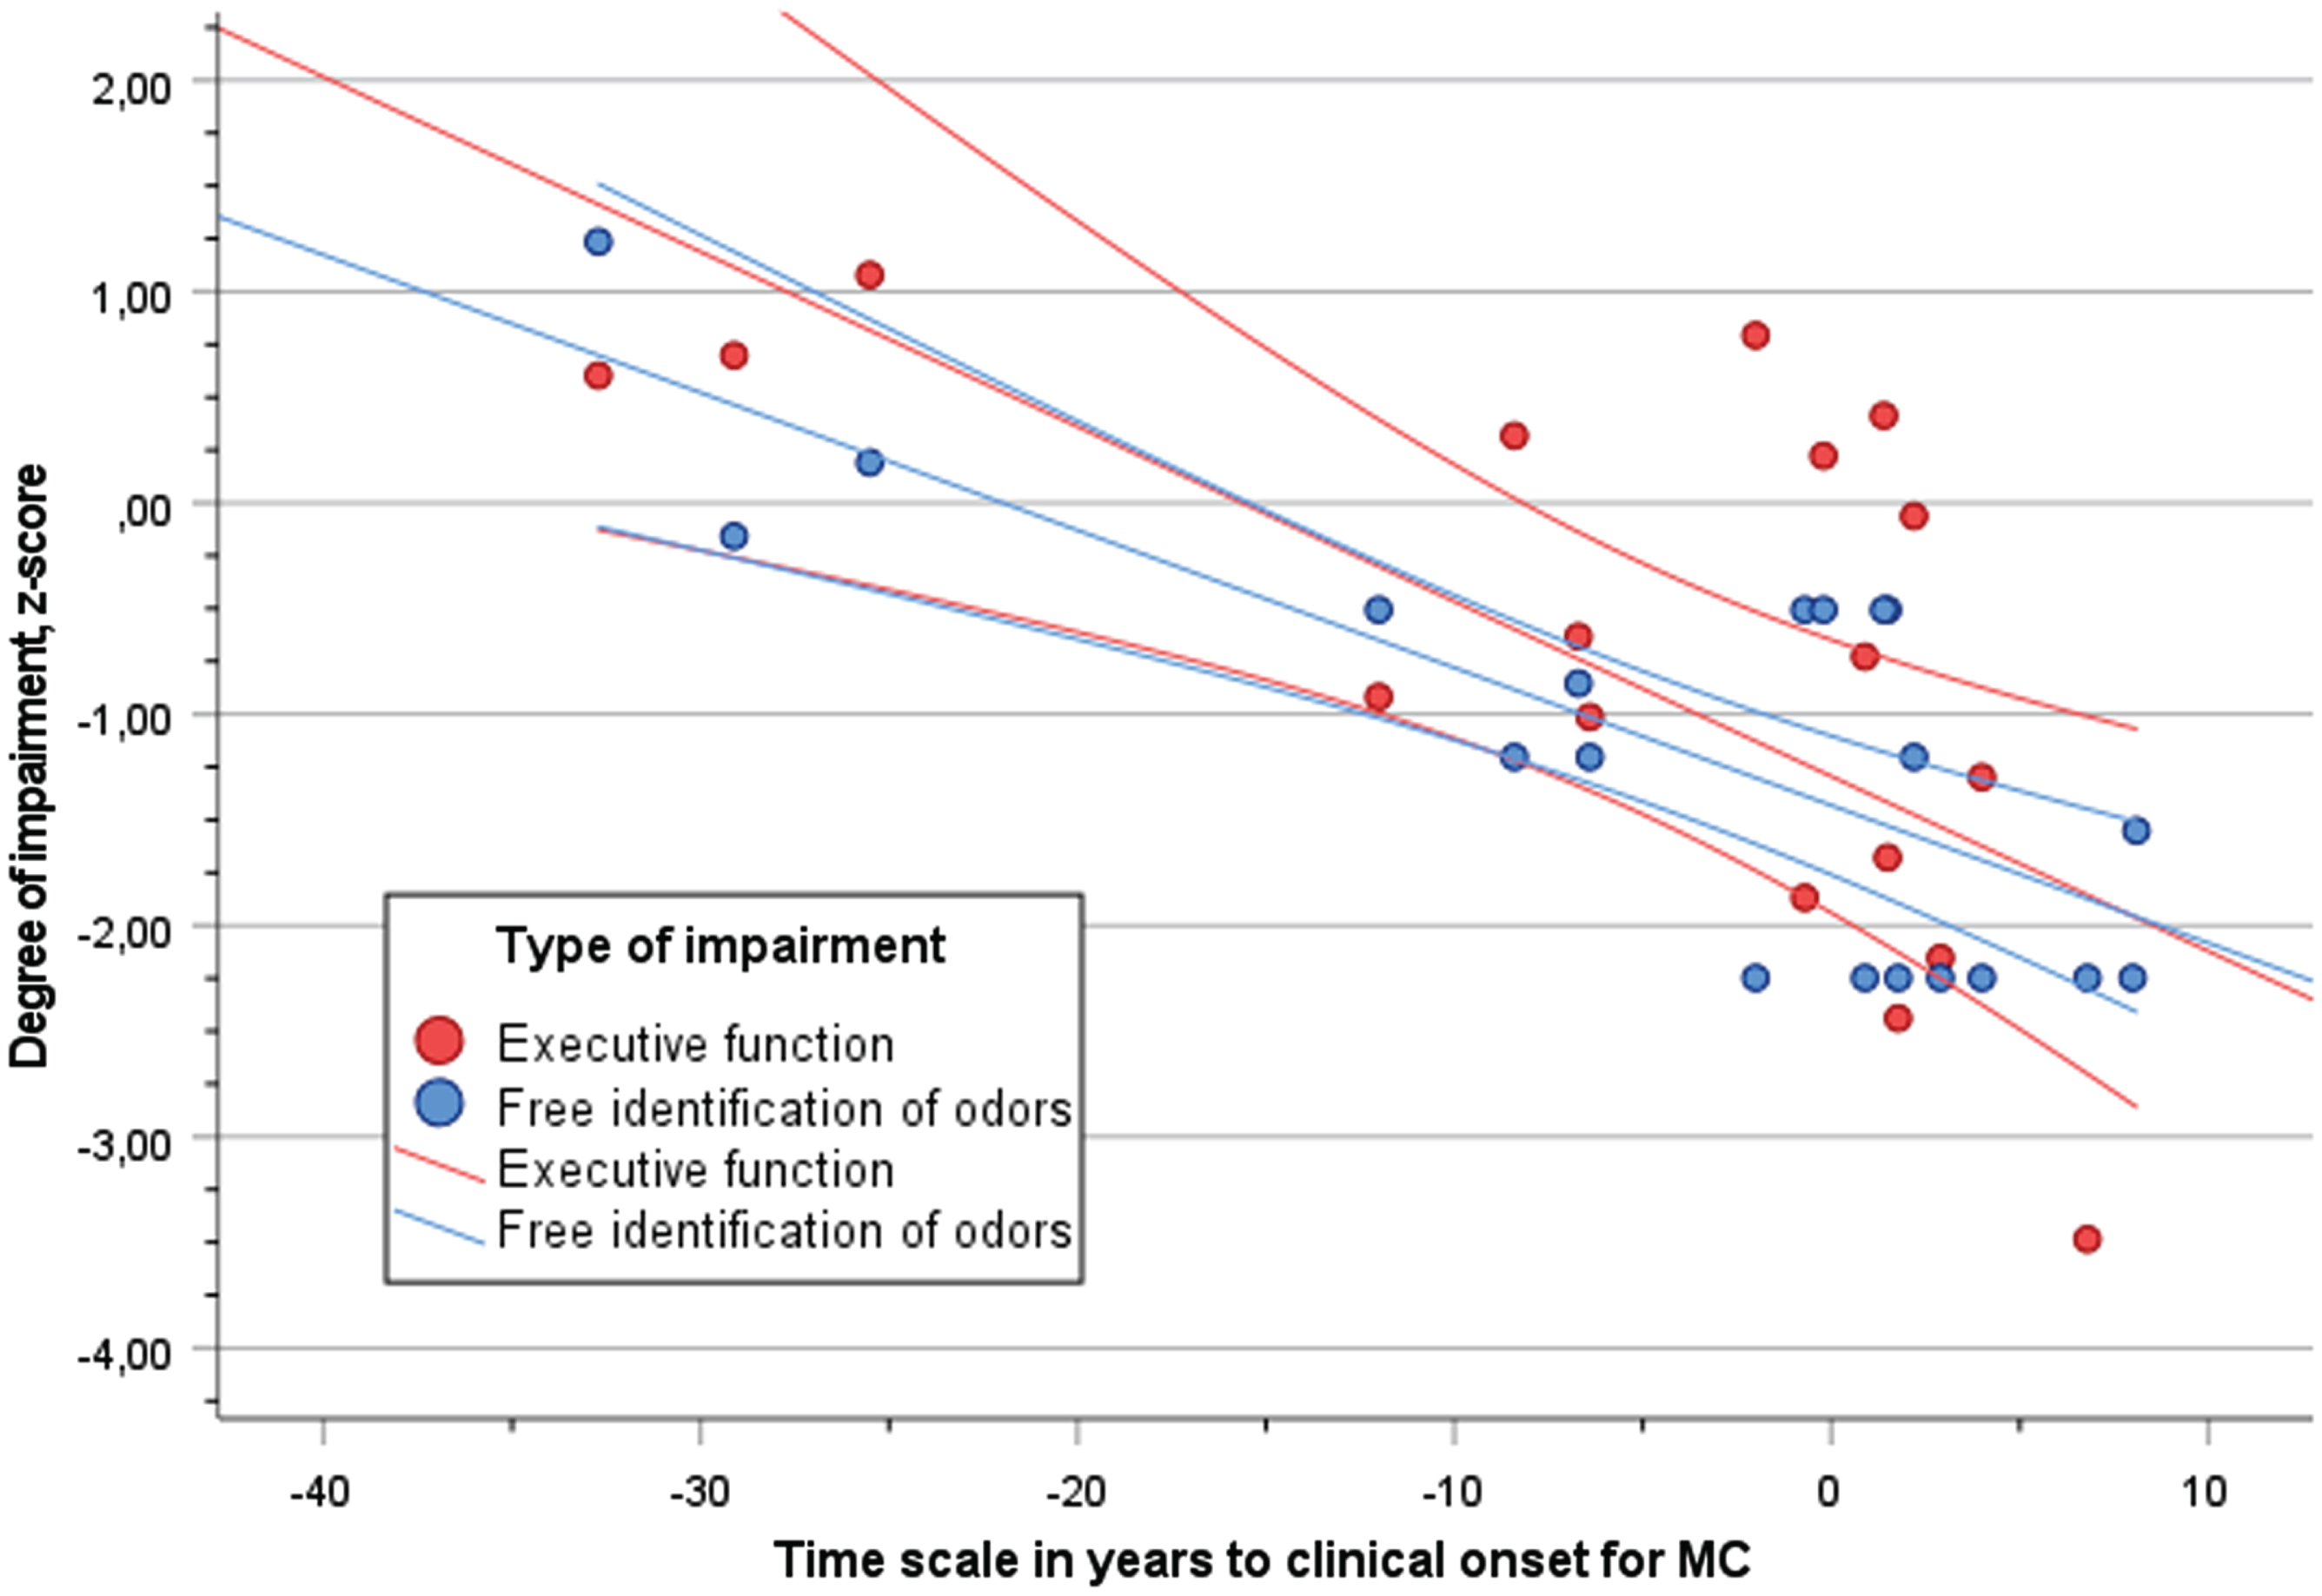 Scatter plot of performance (z-score) in executive function (Digit Symbol, red dots) and free identification of odors (blue dots) in relation to time scale of years to clinical onset (YECO) for MC with 95% confidence interval.